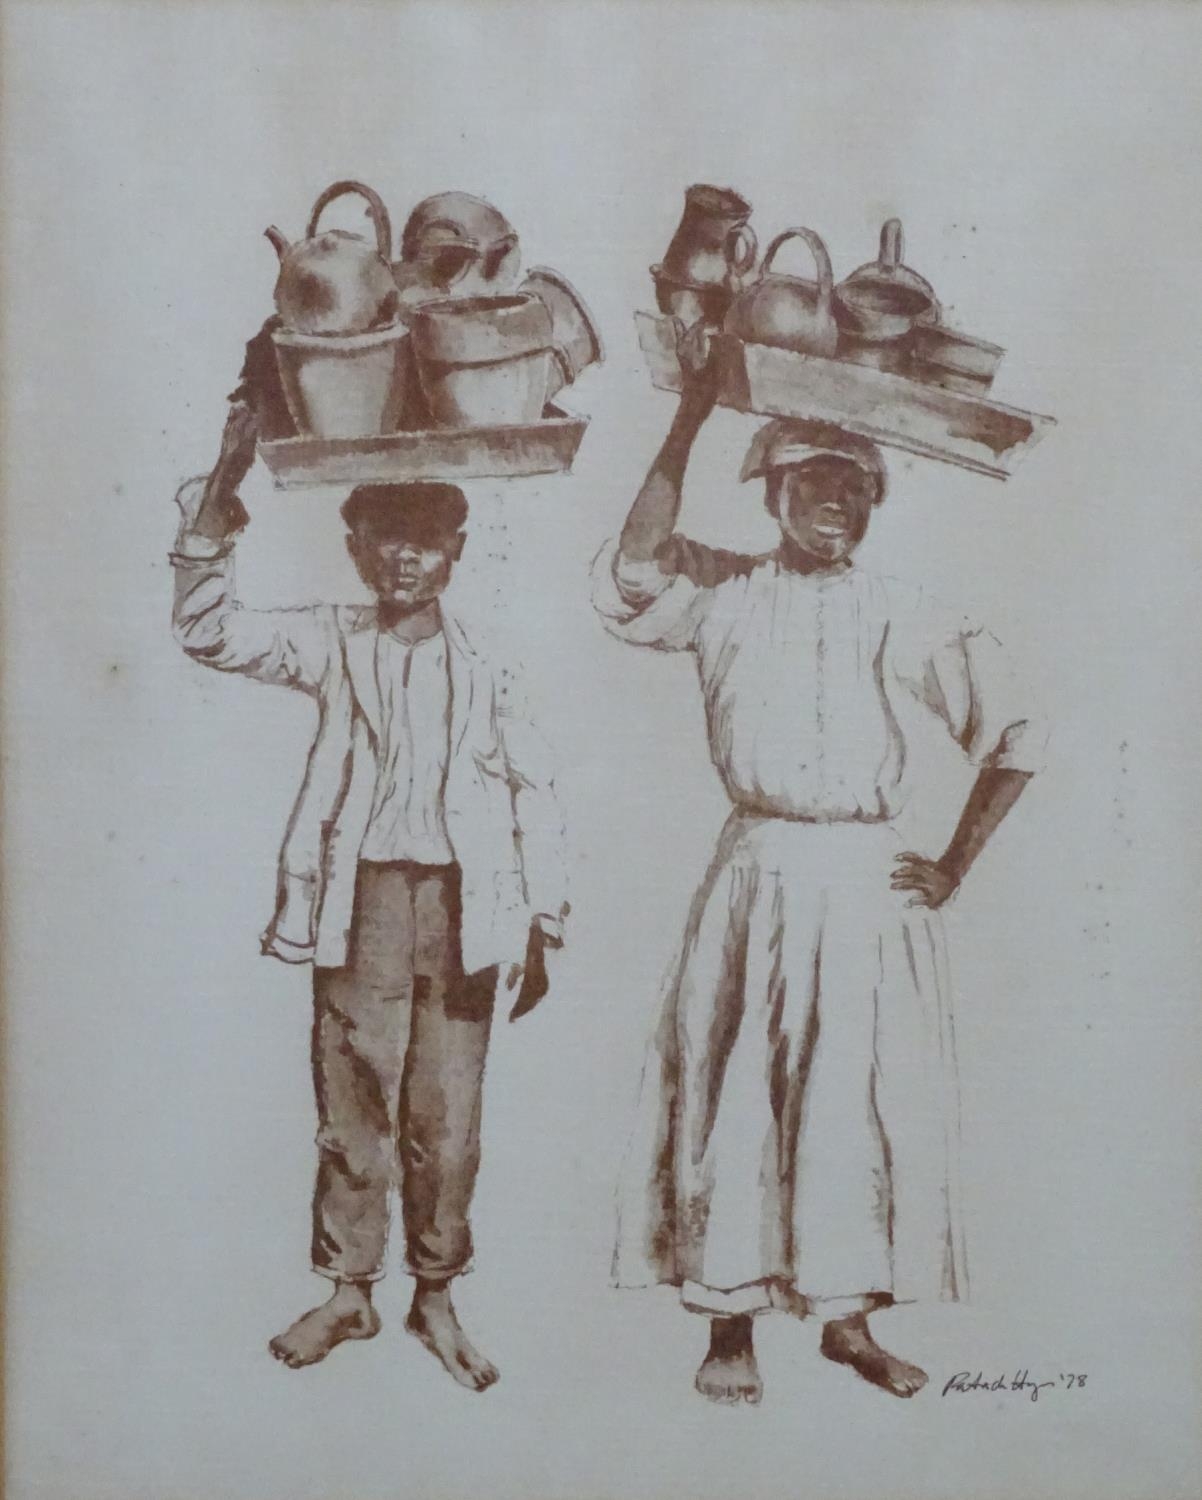 Patrick Hayes, 20th century, Print on textured paper, Two Caribbean figures carrying pots and - Image 3 of 4